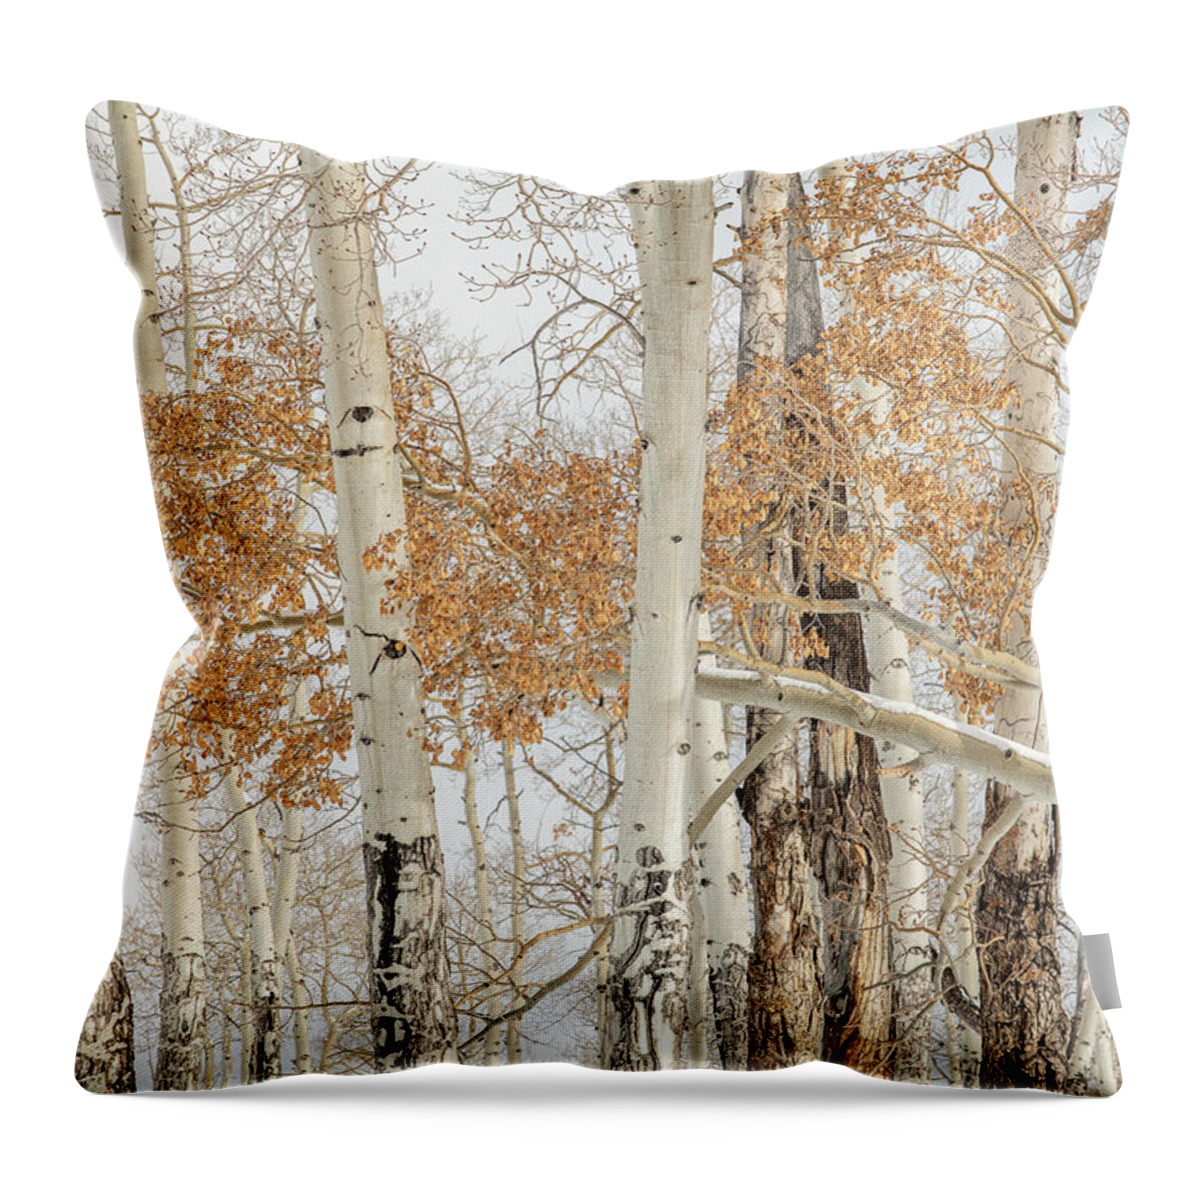 Aspens Throw Pillow featuring the photograph The Fallen by Angela Moyer